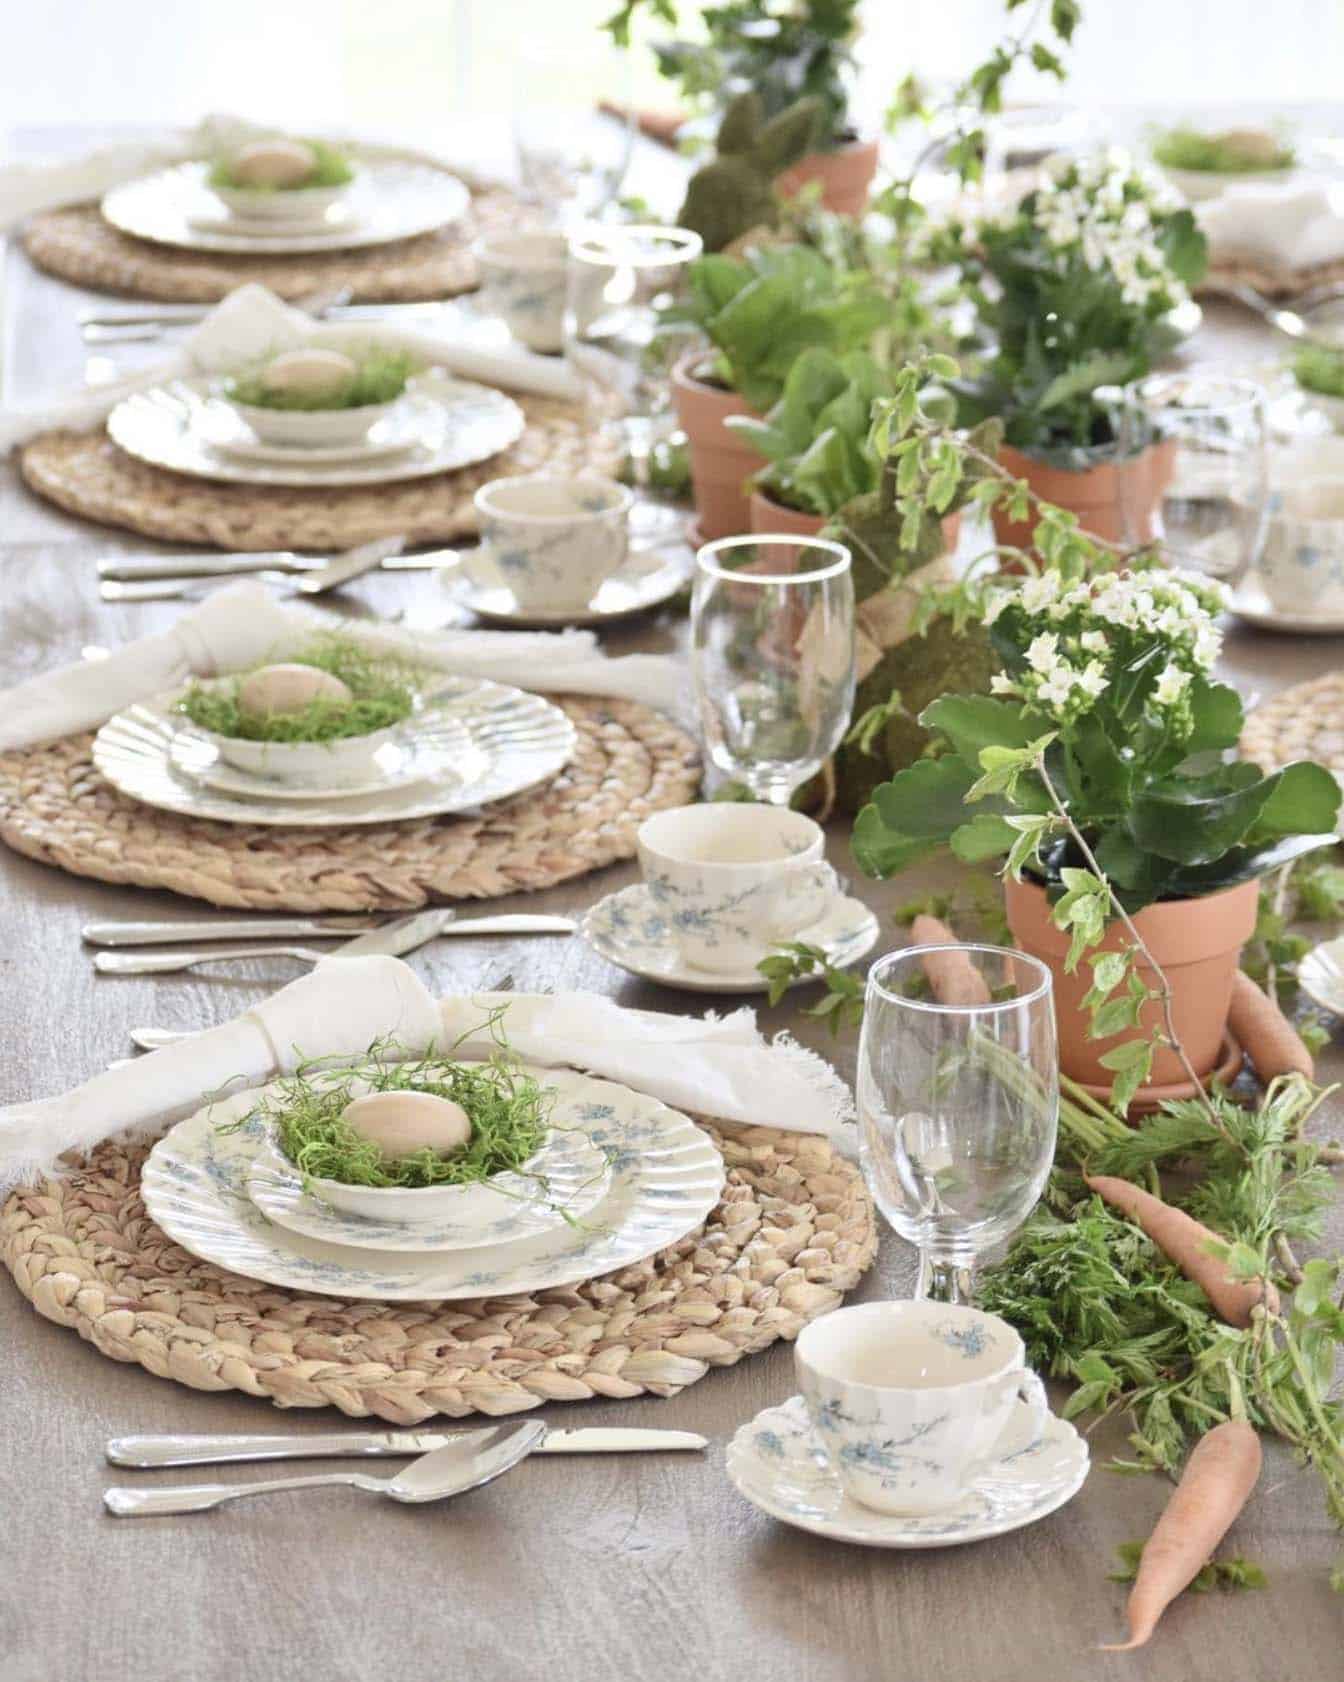 Easter tablescape with terracotta pots, blooming flowers, branches, moss, and wooden eggs